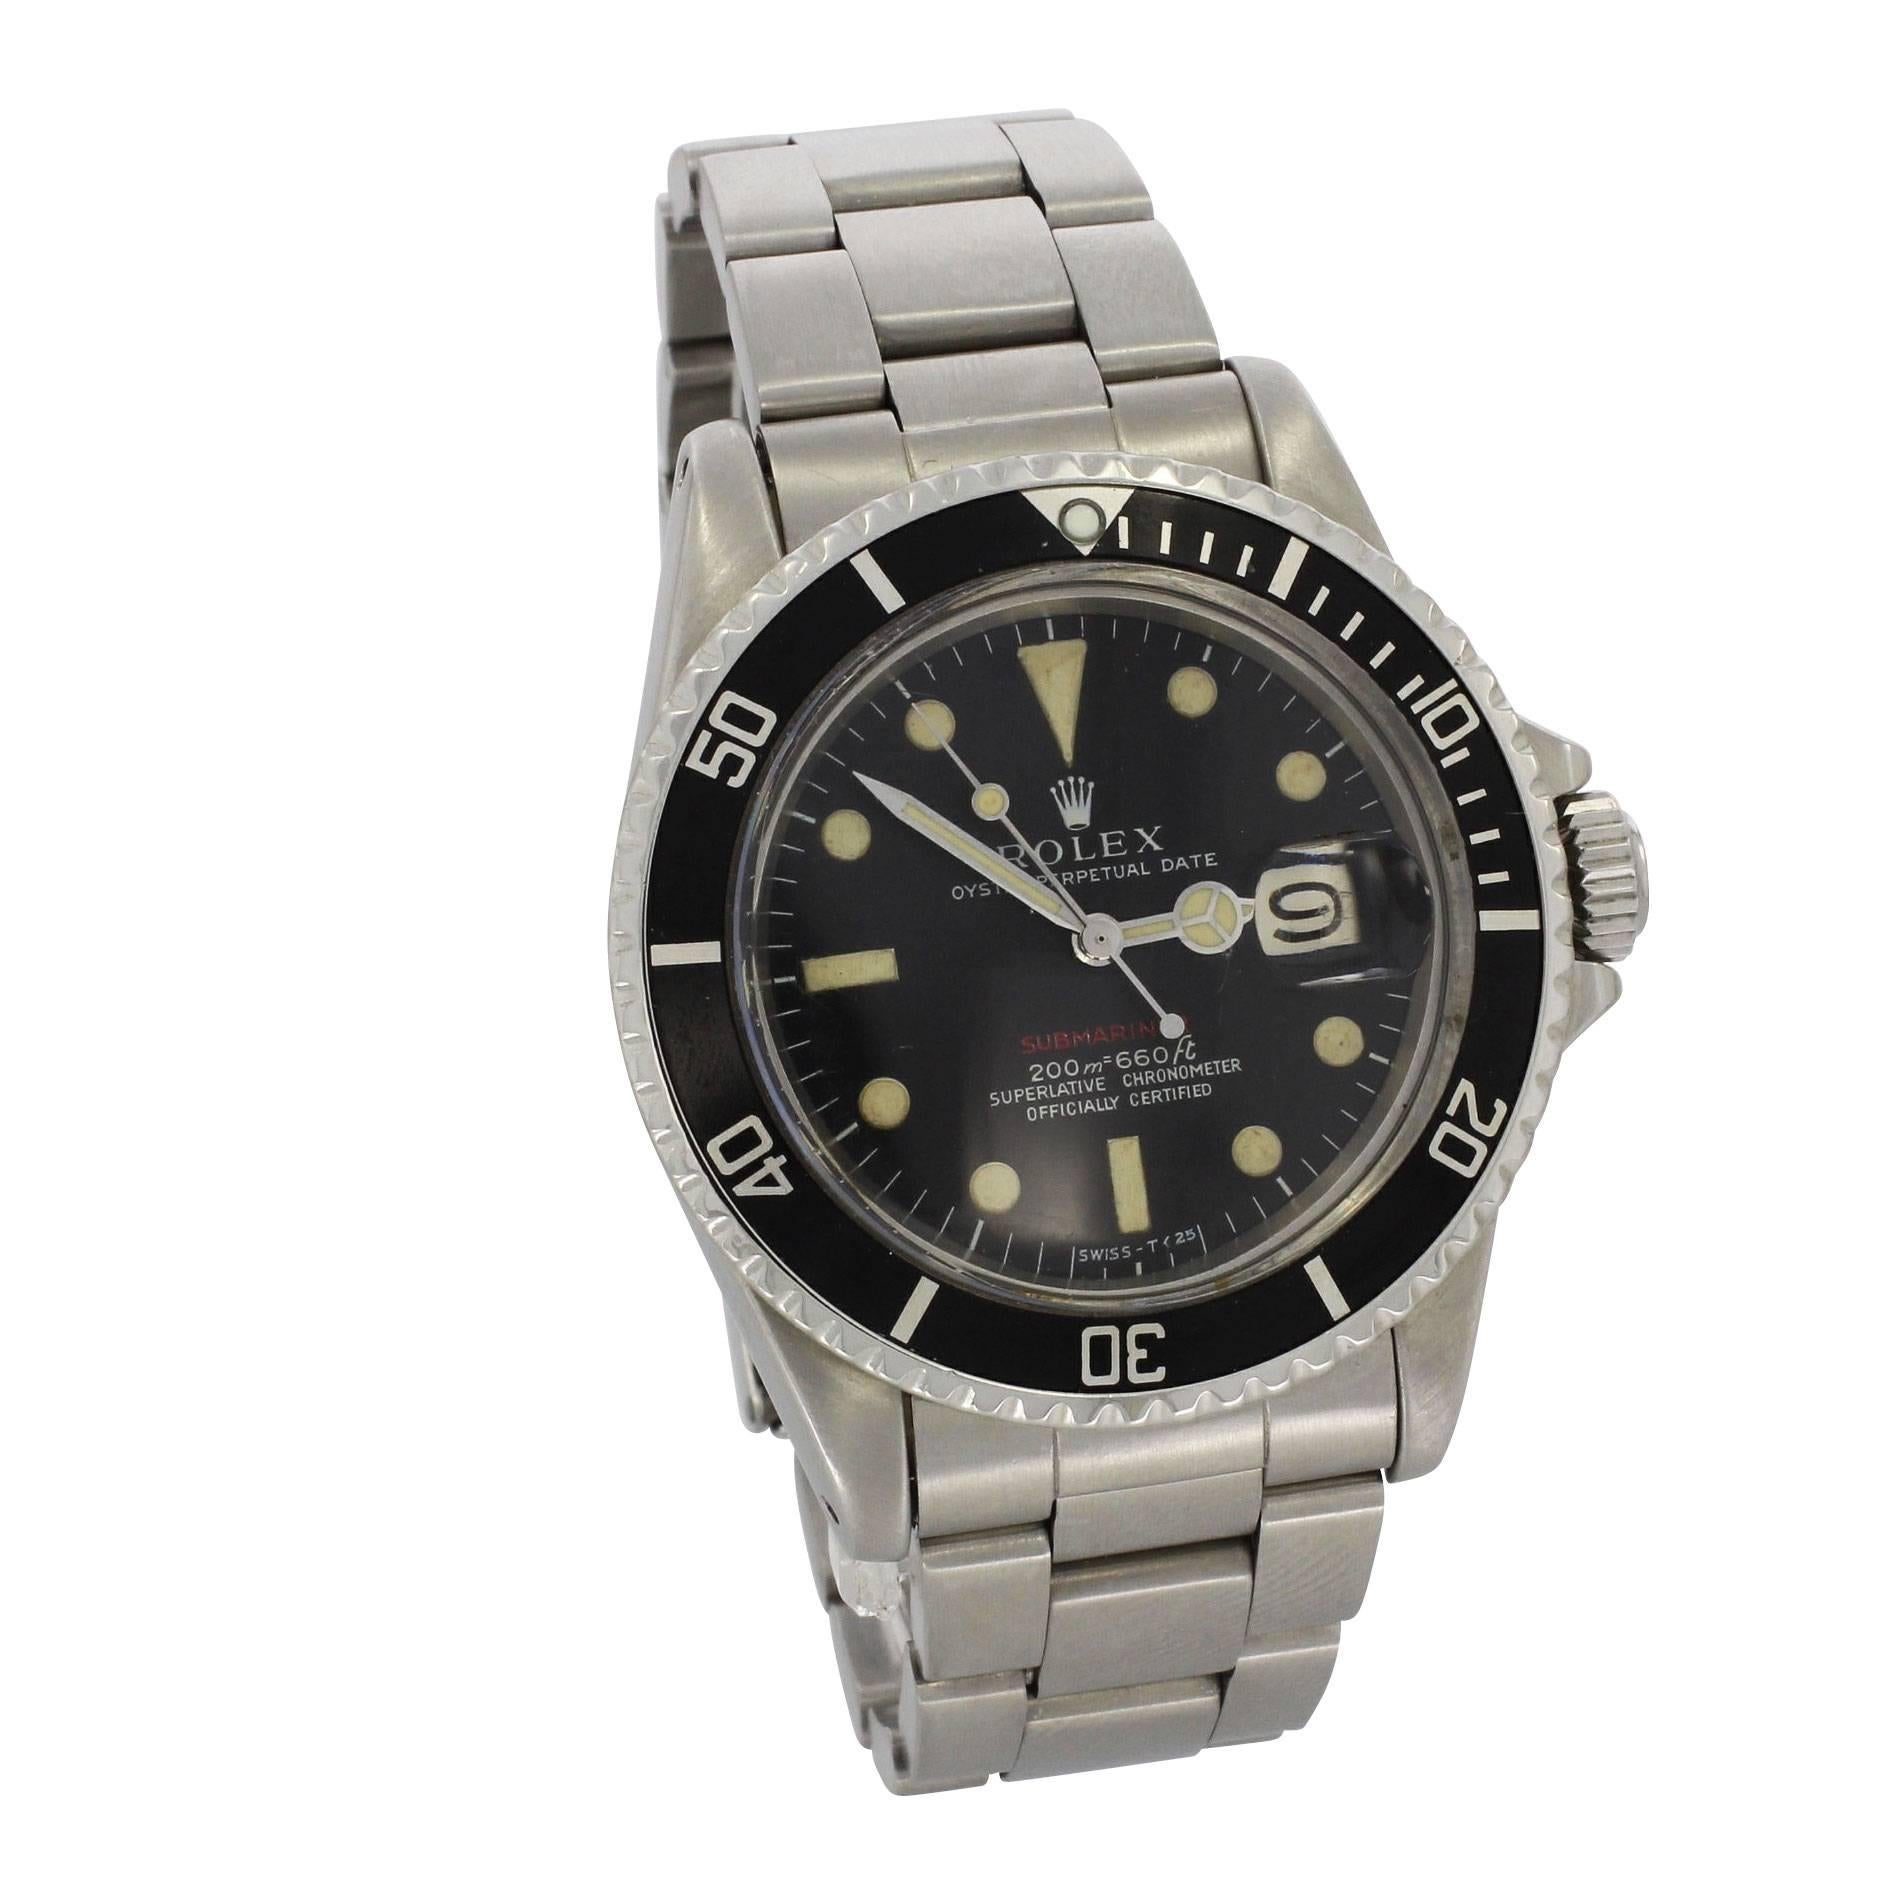 Rolex Stainless Steel Big Red 1680 Submariner Wristwatch, 1979 For Sale 2